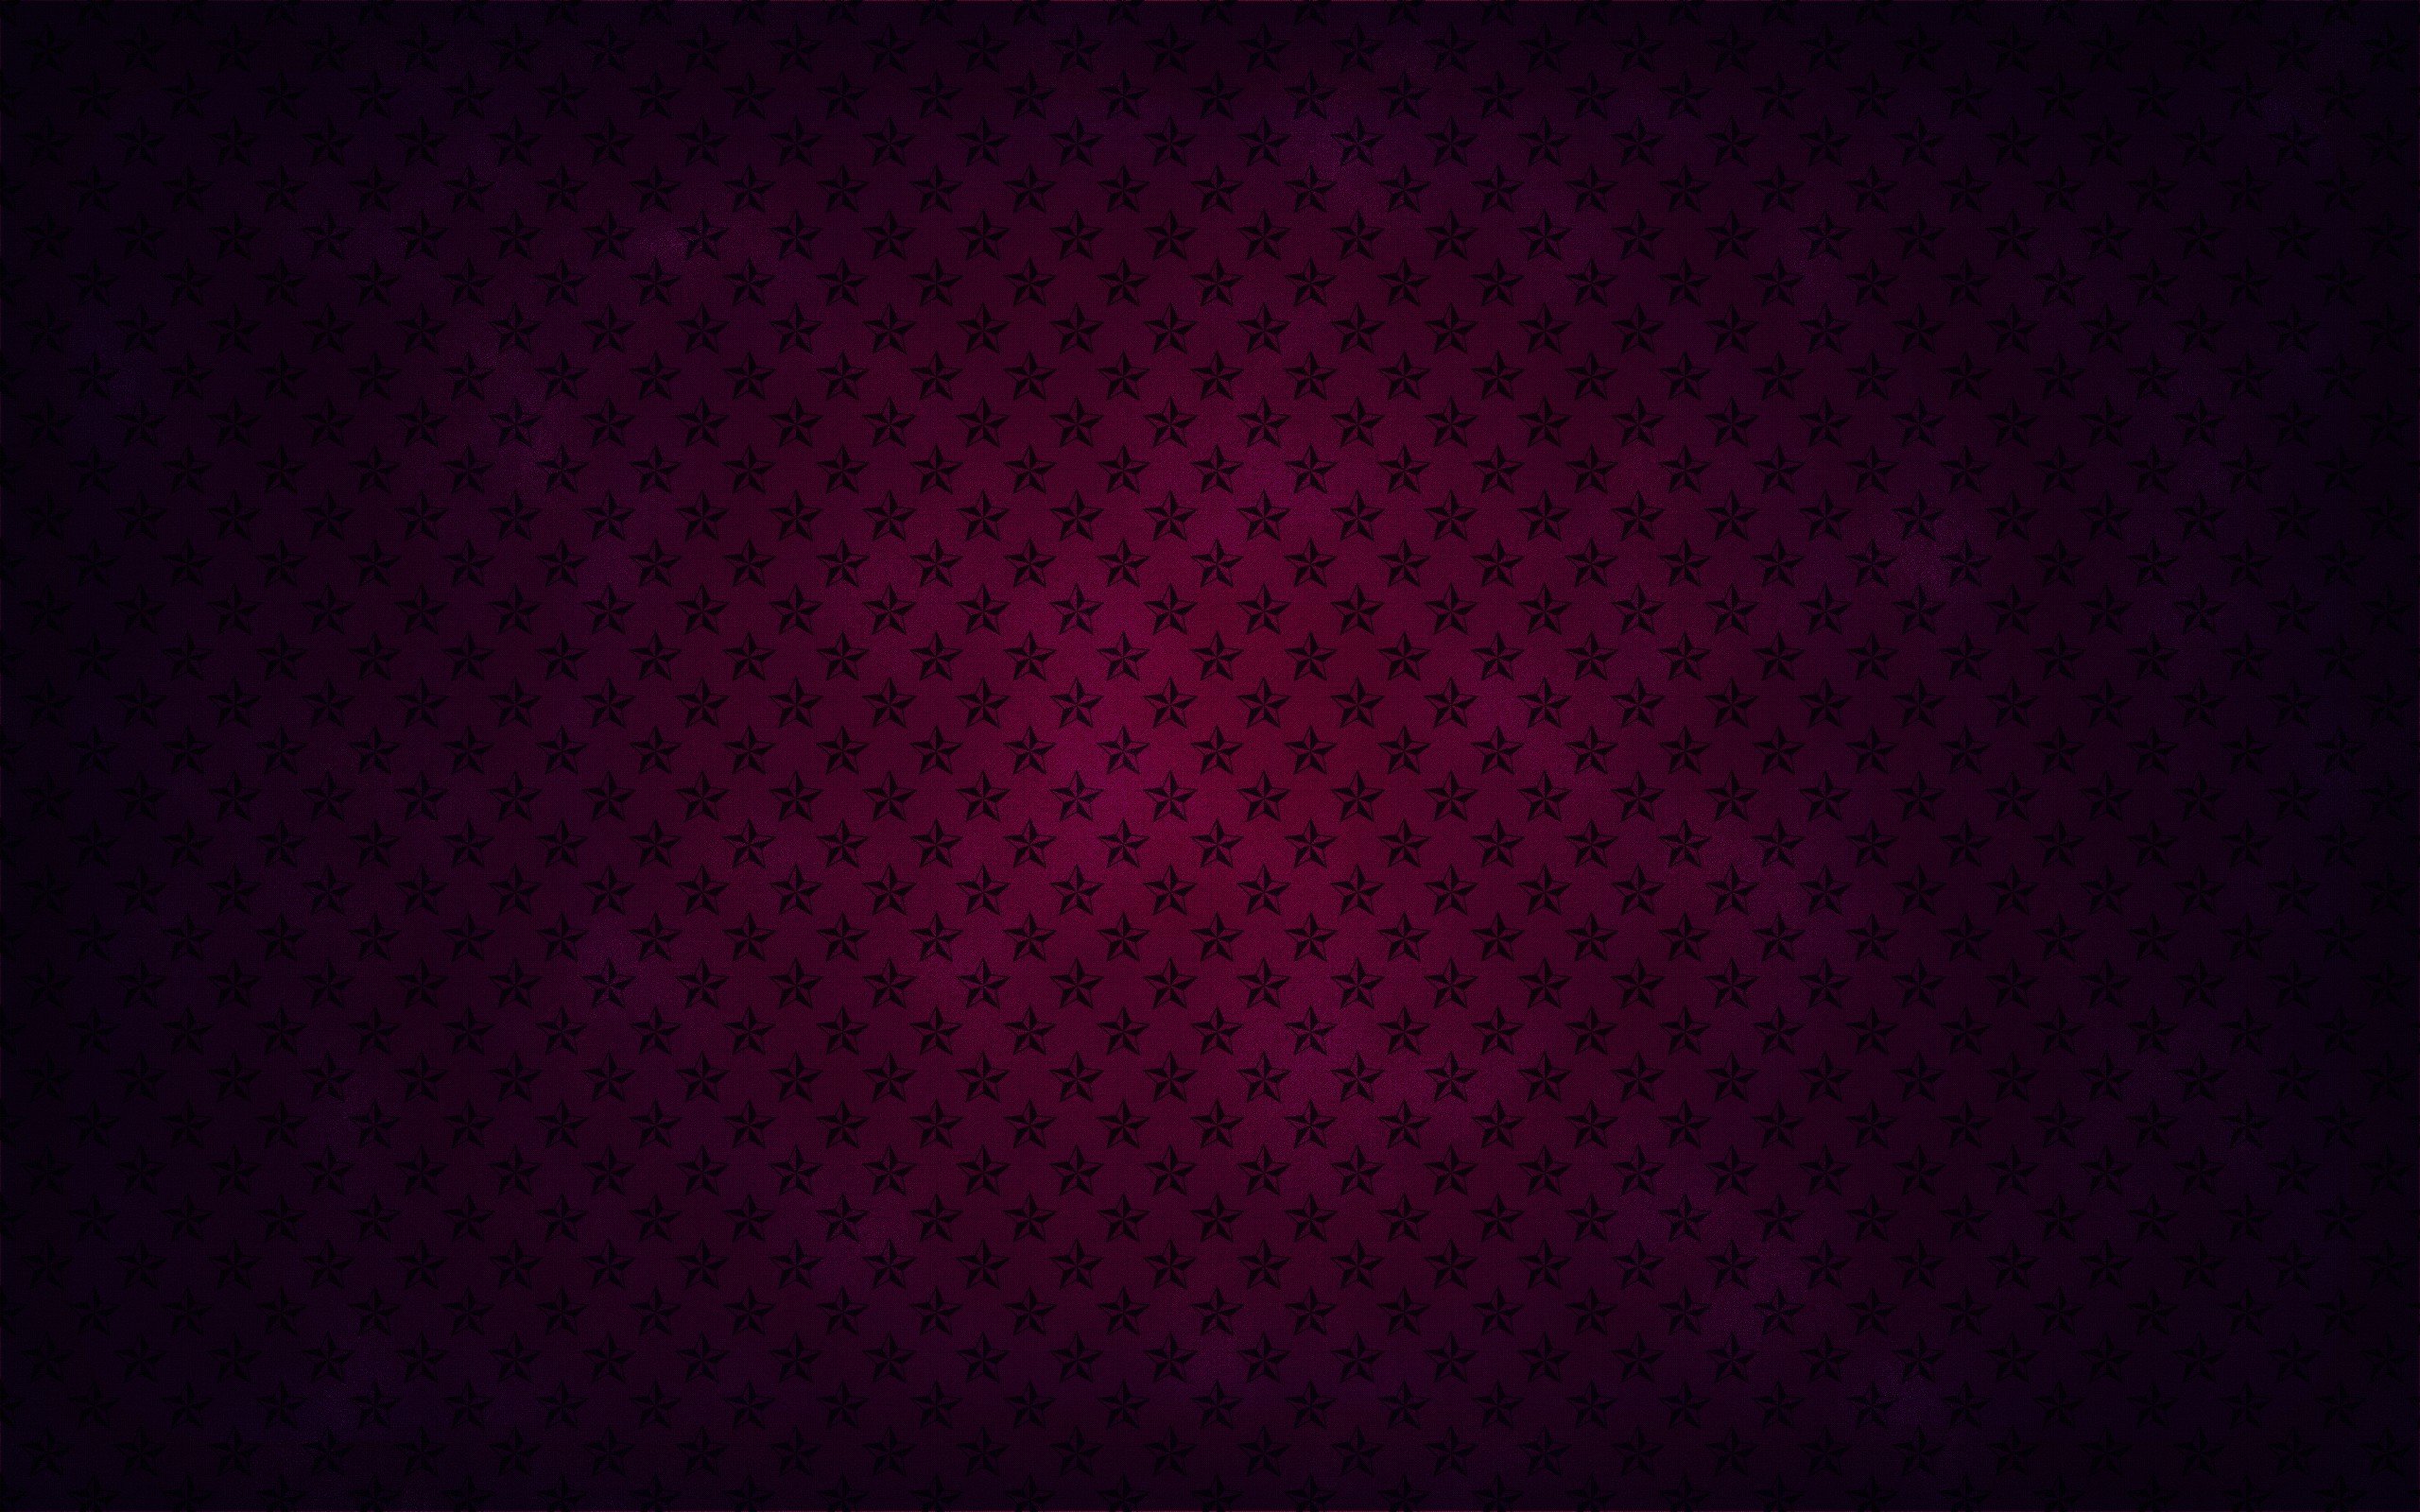  Pink Black Star Background Daily Pics Update HD Wallpapers